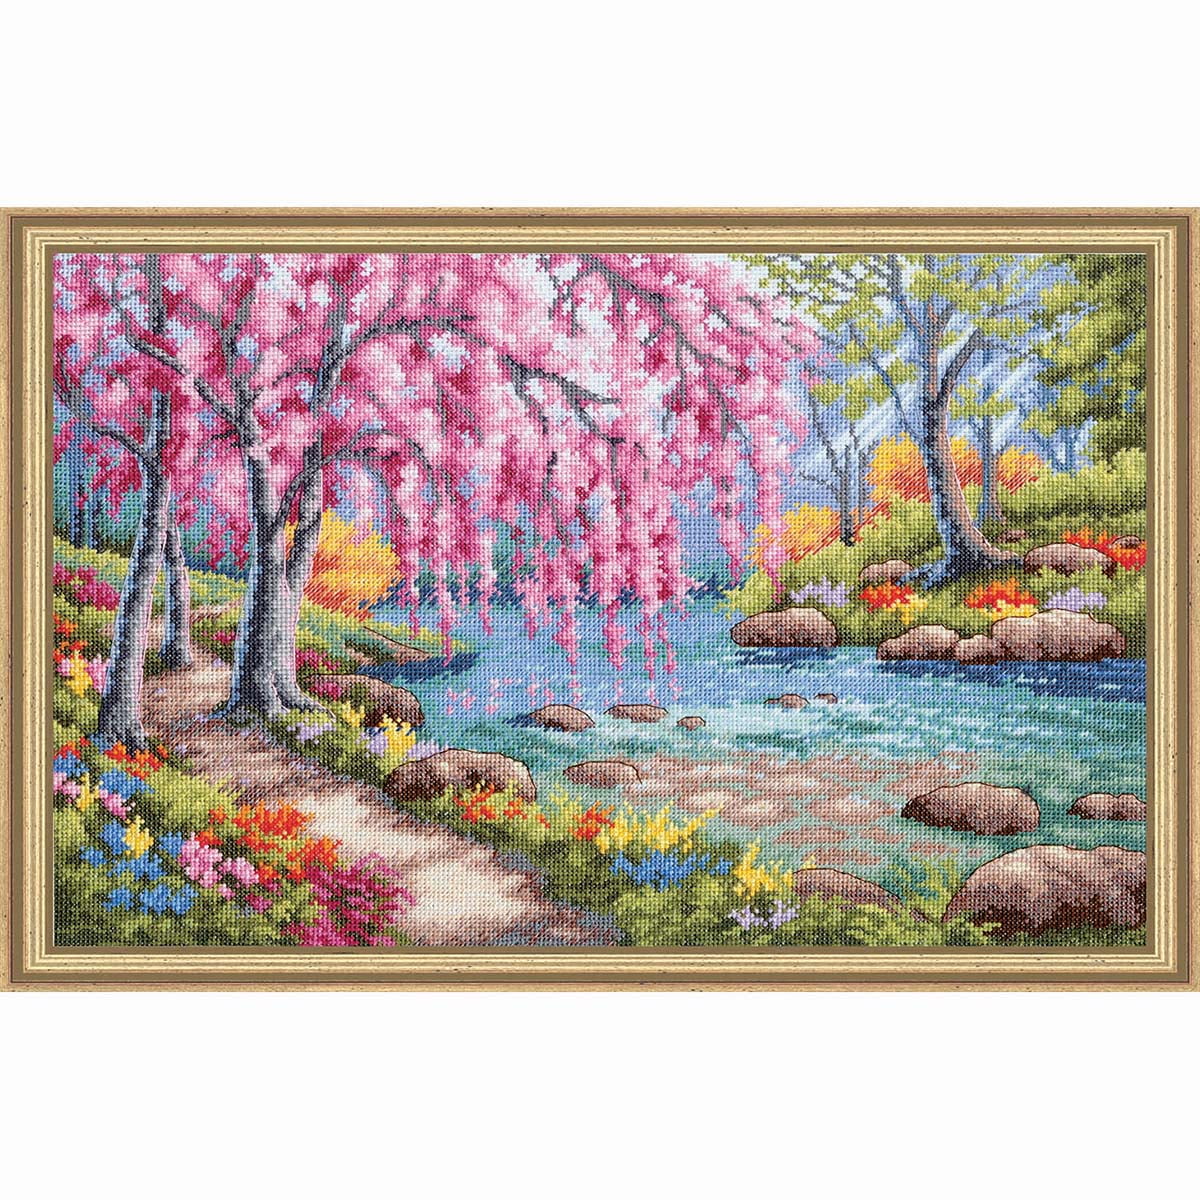 Paris and Cherry Blossoms Collage DIGITAL Counted Cross-Stitch Pattern Chart 